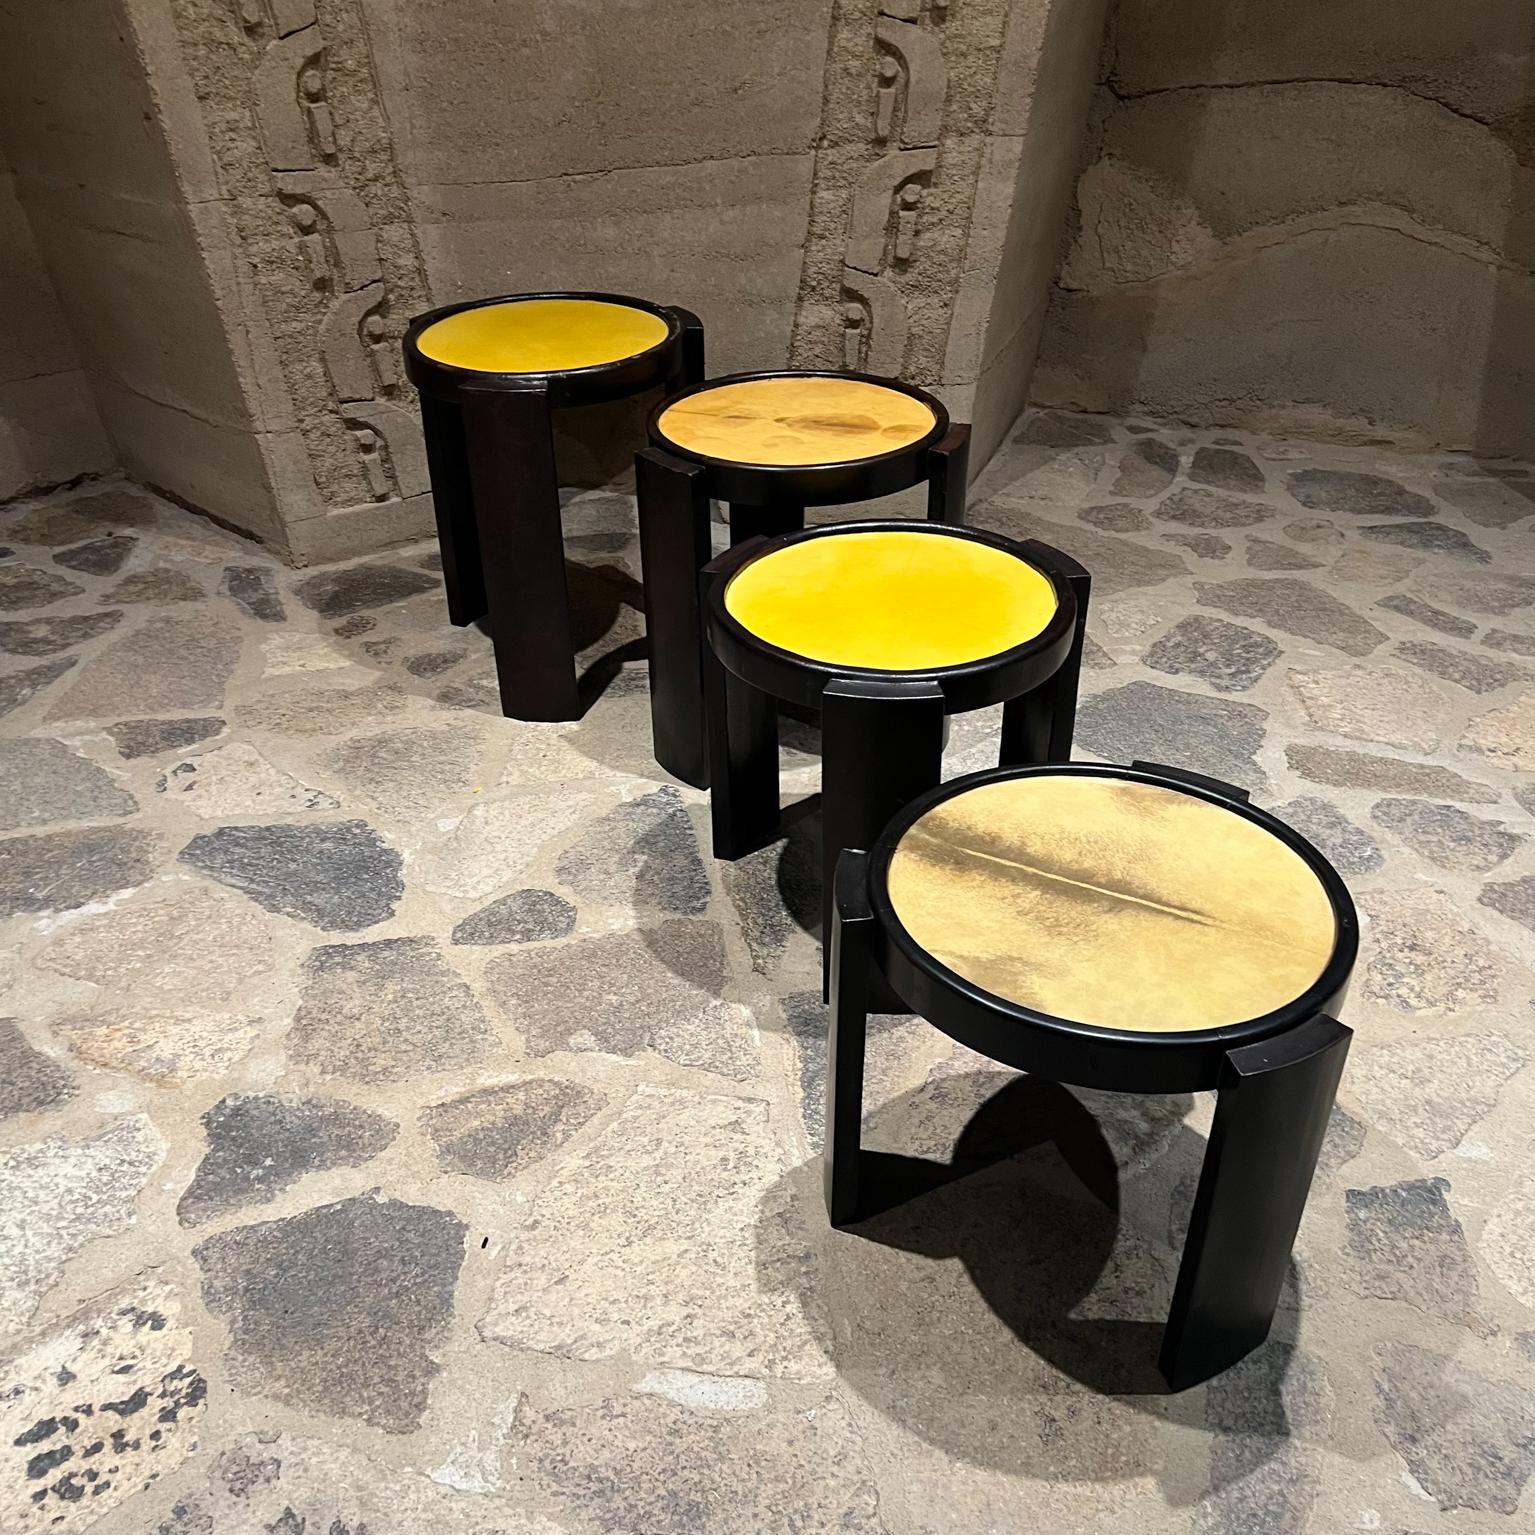 1950s four Goatskin leather nesting tables Eugenio Escudero Mexican Modernism
Round Nesting tables wood with patinated leather & goatskin.
Unmarked, attribution Eugenio Escudero Midcentury Mexico
Set of Four:
1. 20 H x 17.25 in diameter,
2.